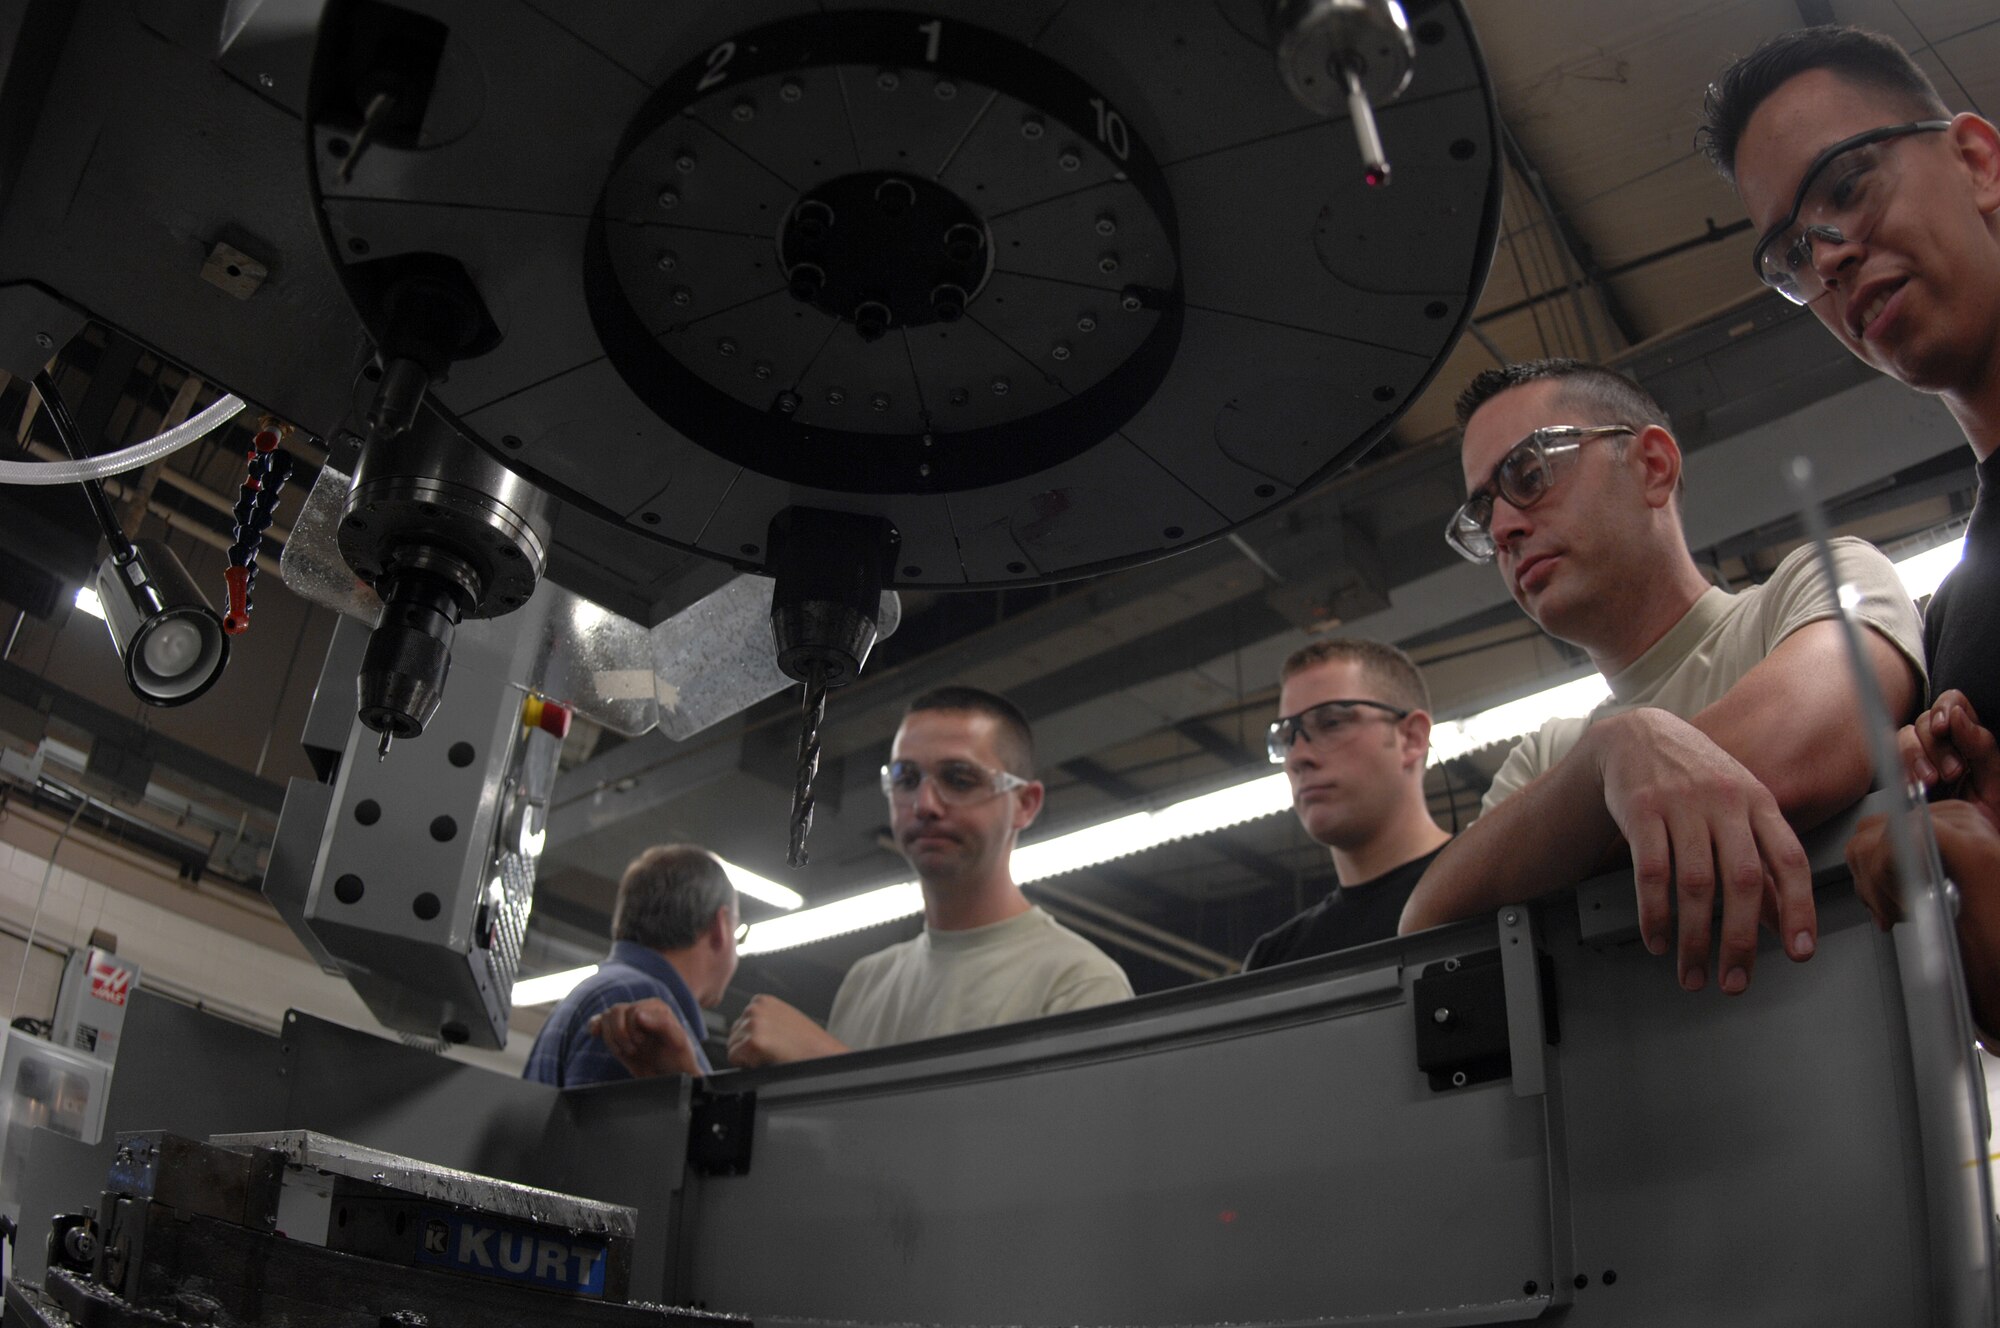 MOODY AIR FORCE BASE, Ga. -- Senior Airman Juan Ruiz, (far right) Airman Michael McClellan, (right) Airman Eric Dininger, (middle) and Staff Sgt. James Gilliland, 23rd Equipment Maintenance Squadron aircraft metals technology, observe how pre-loading tools in a new mill machine assembly saves time during fabrication here August 27.  The group of airmen present during the two day training class will pass on operation knowledge to other airmen throughout the metal workshop to minimize impact on current projects. (U.S. Air Force photo by Senior Airman Javier Cruz)